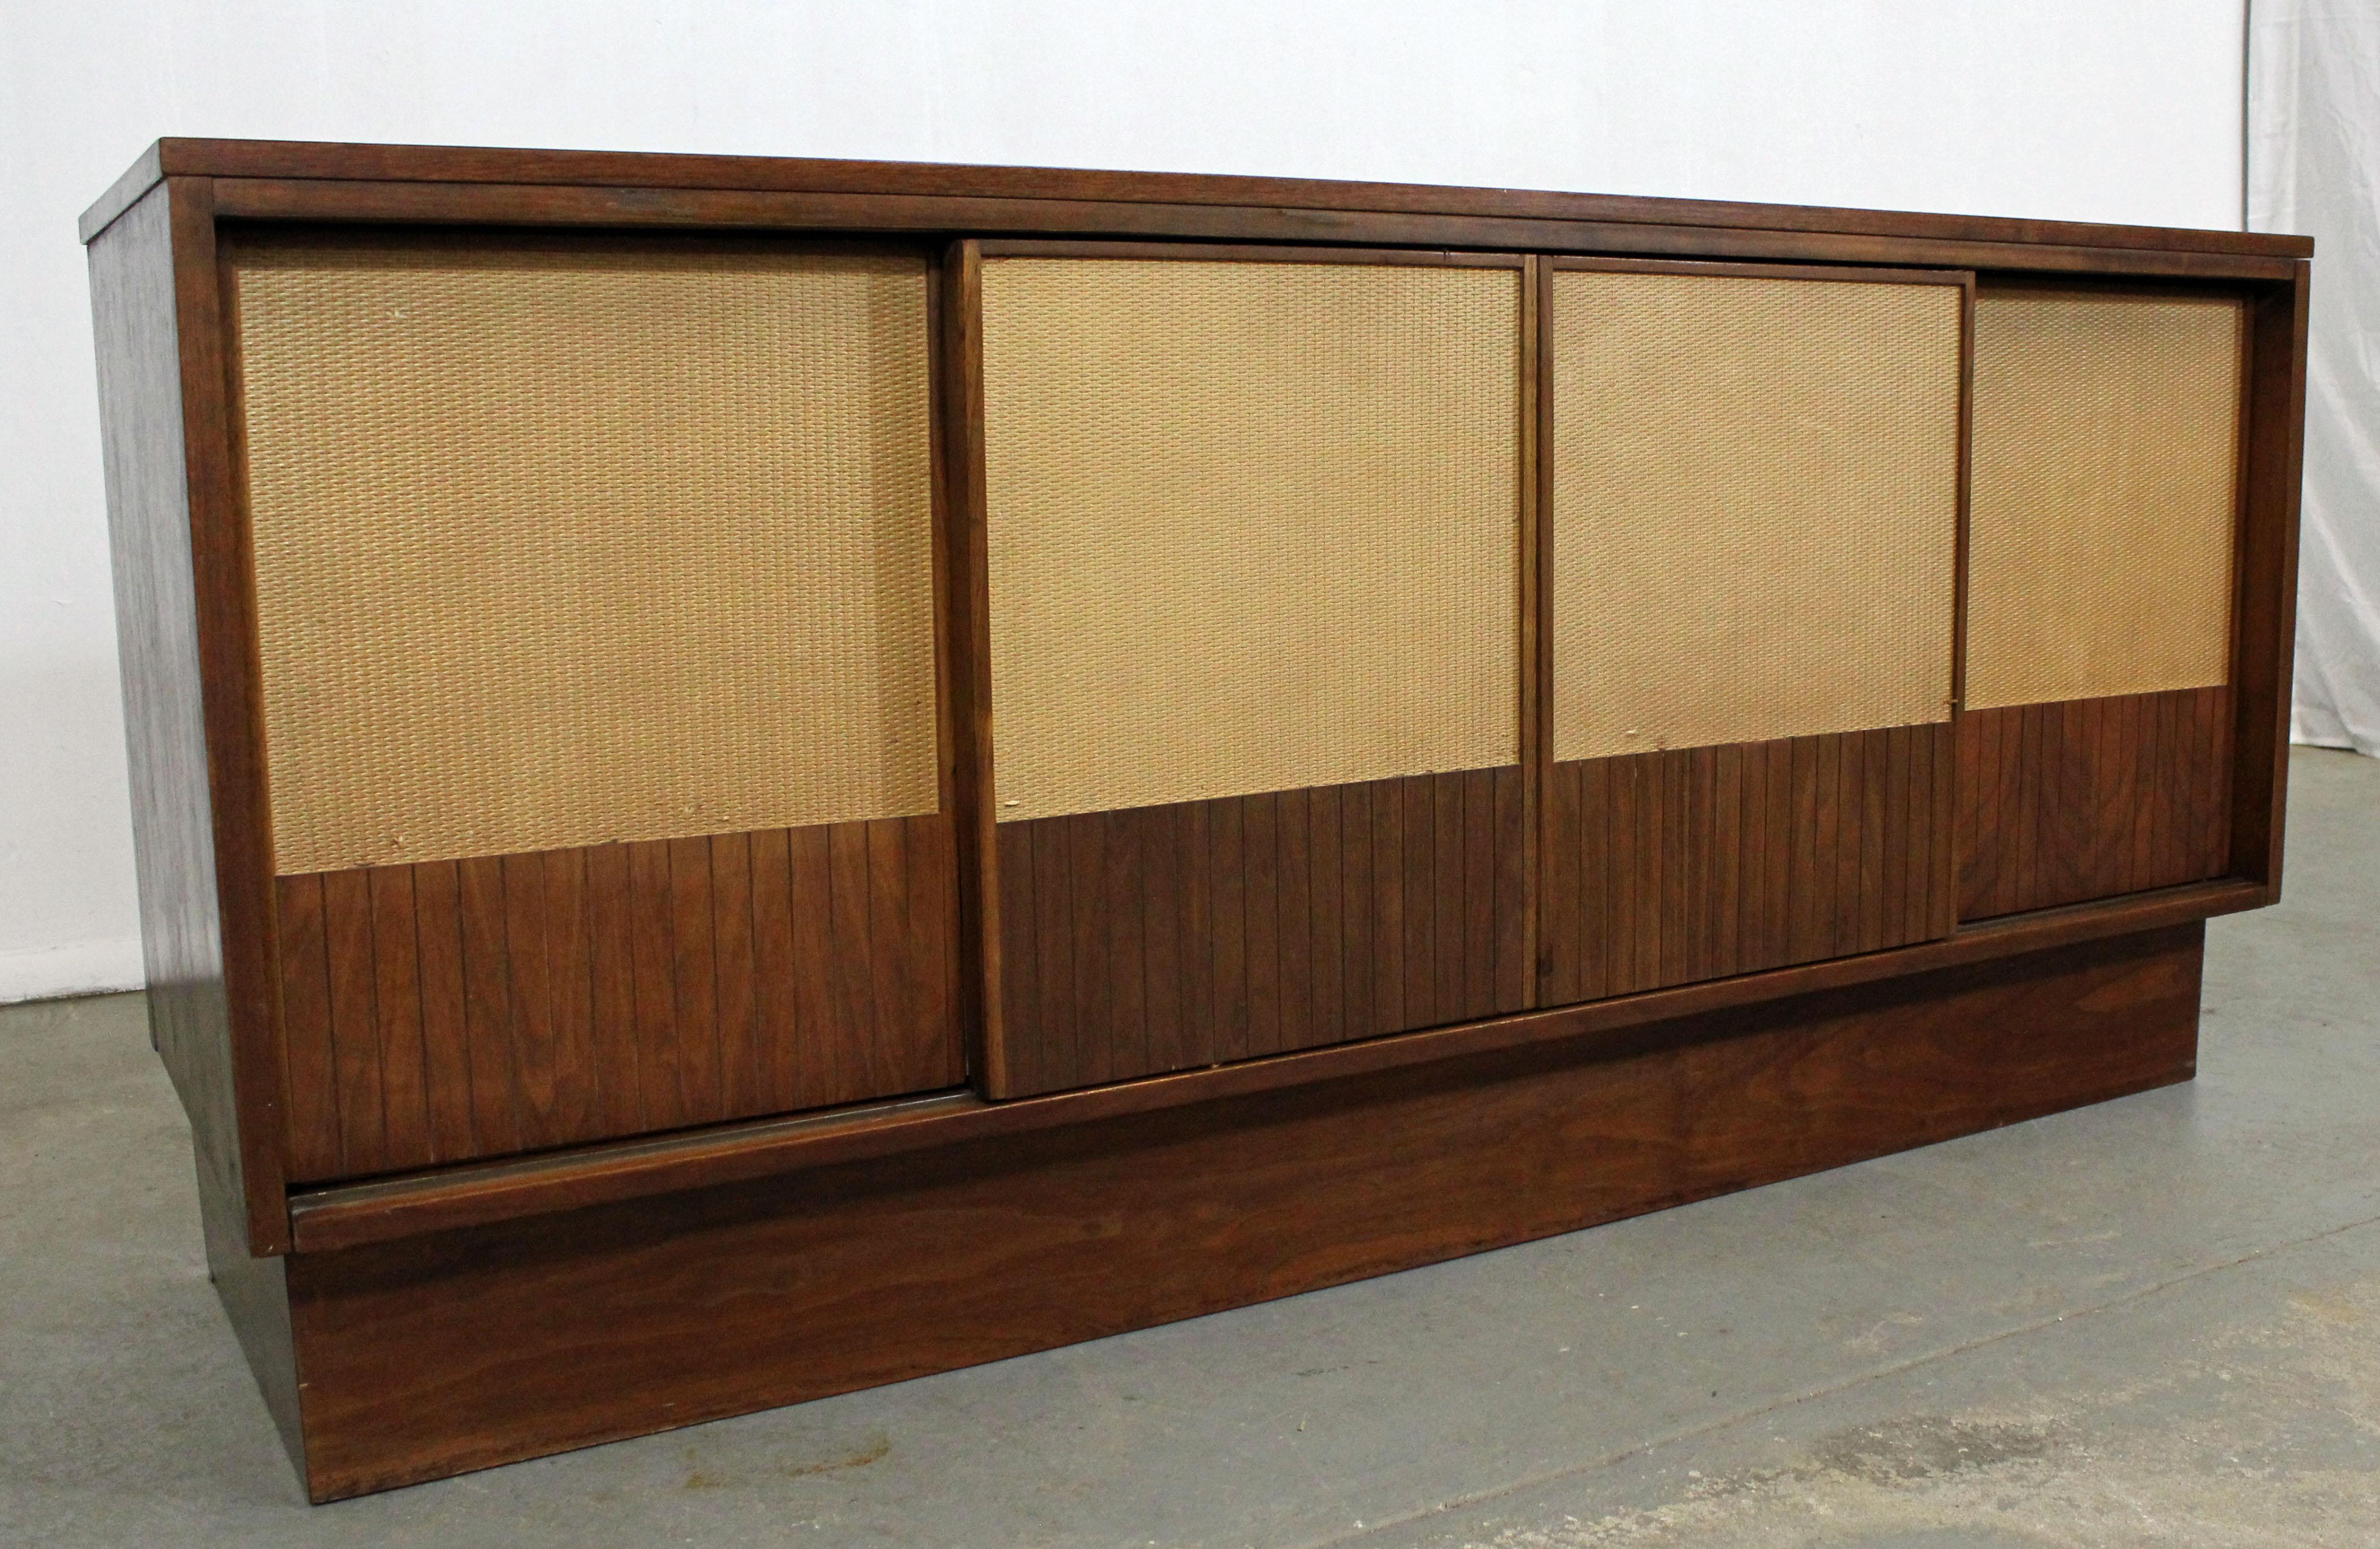 Offered is a Mid-Century Modern customized walnut credenza, featuring four caned sliding doors with inside storage. This piece has been converted into a media console/record player stand by the previous owner. Inside has various shelving and a pull